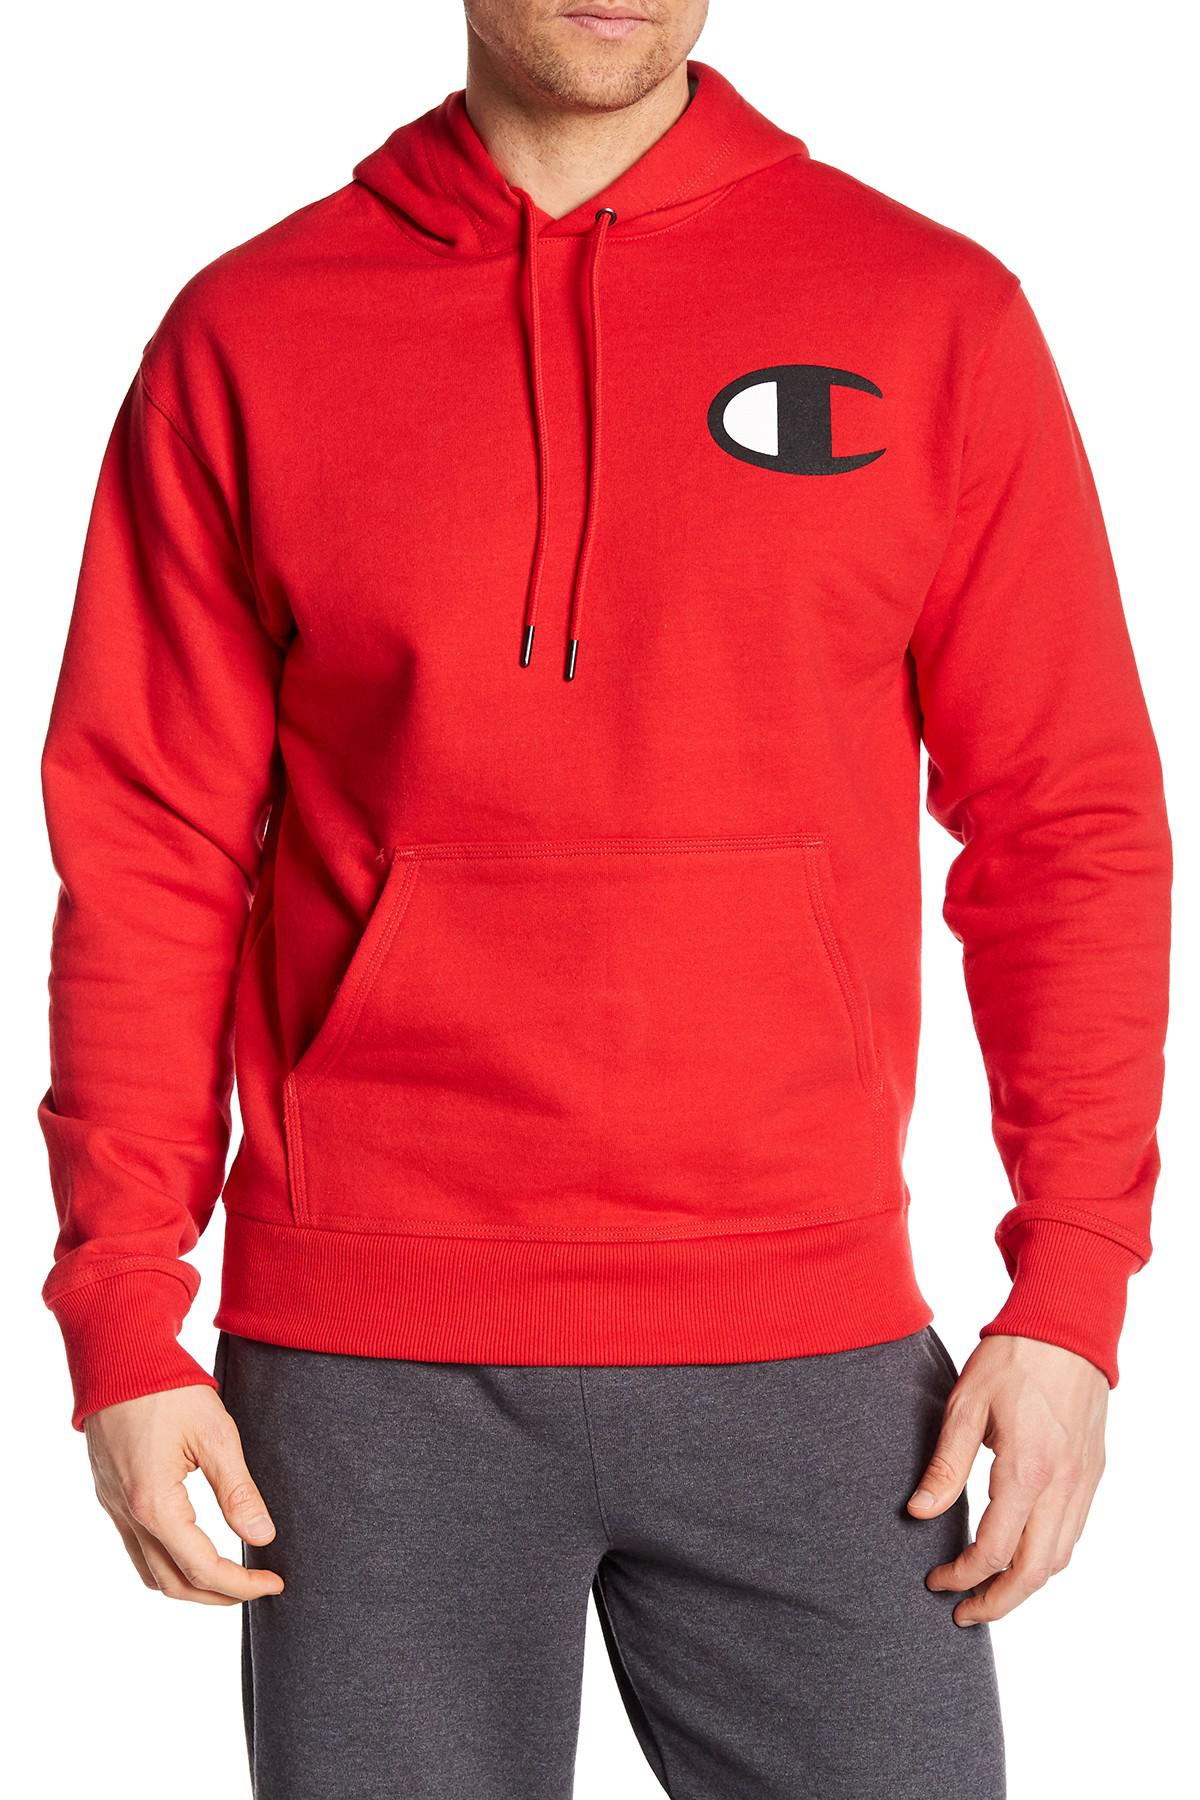 Lyst - Champion Graphic Powerblend Hoodie in Red for Men